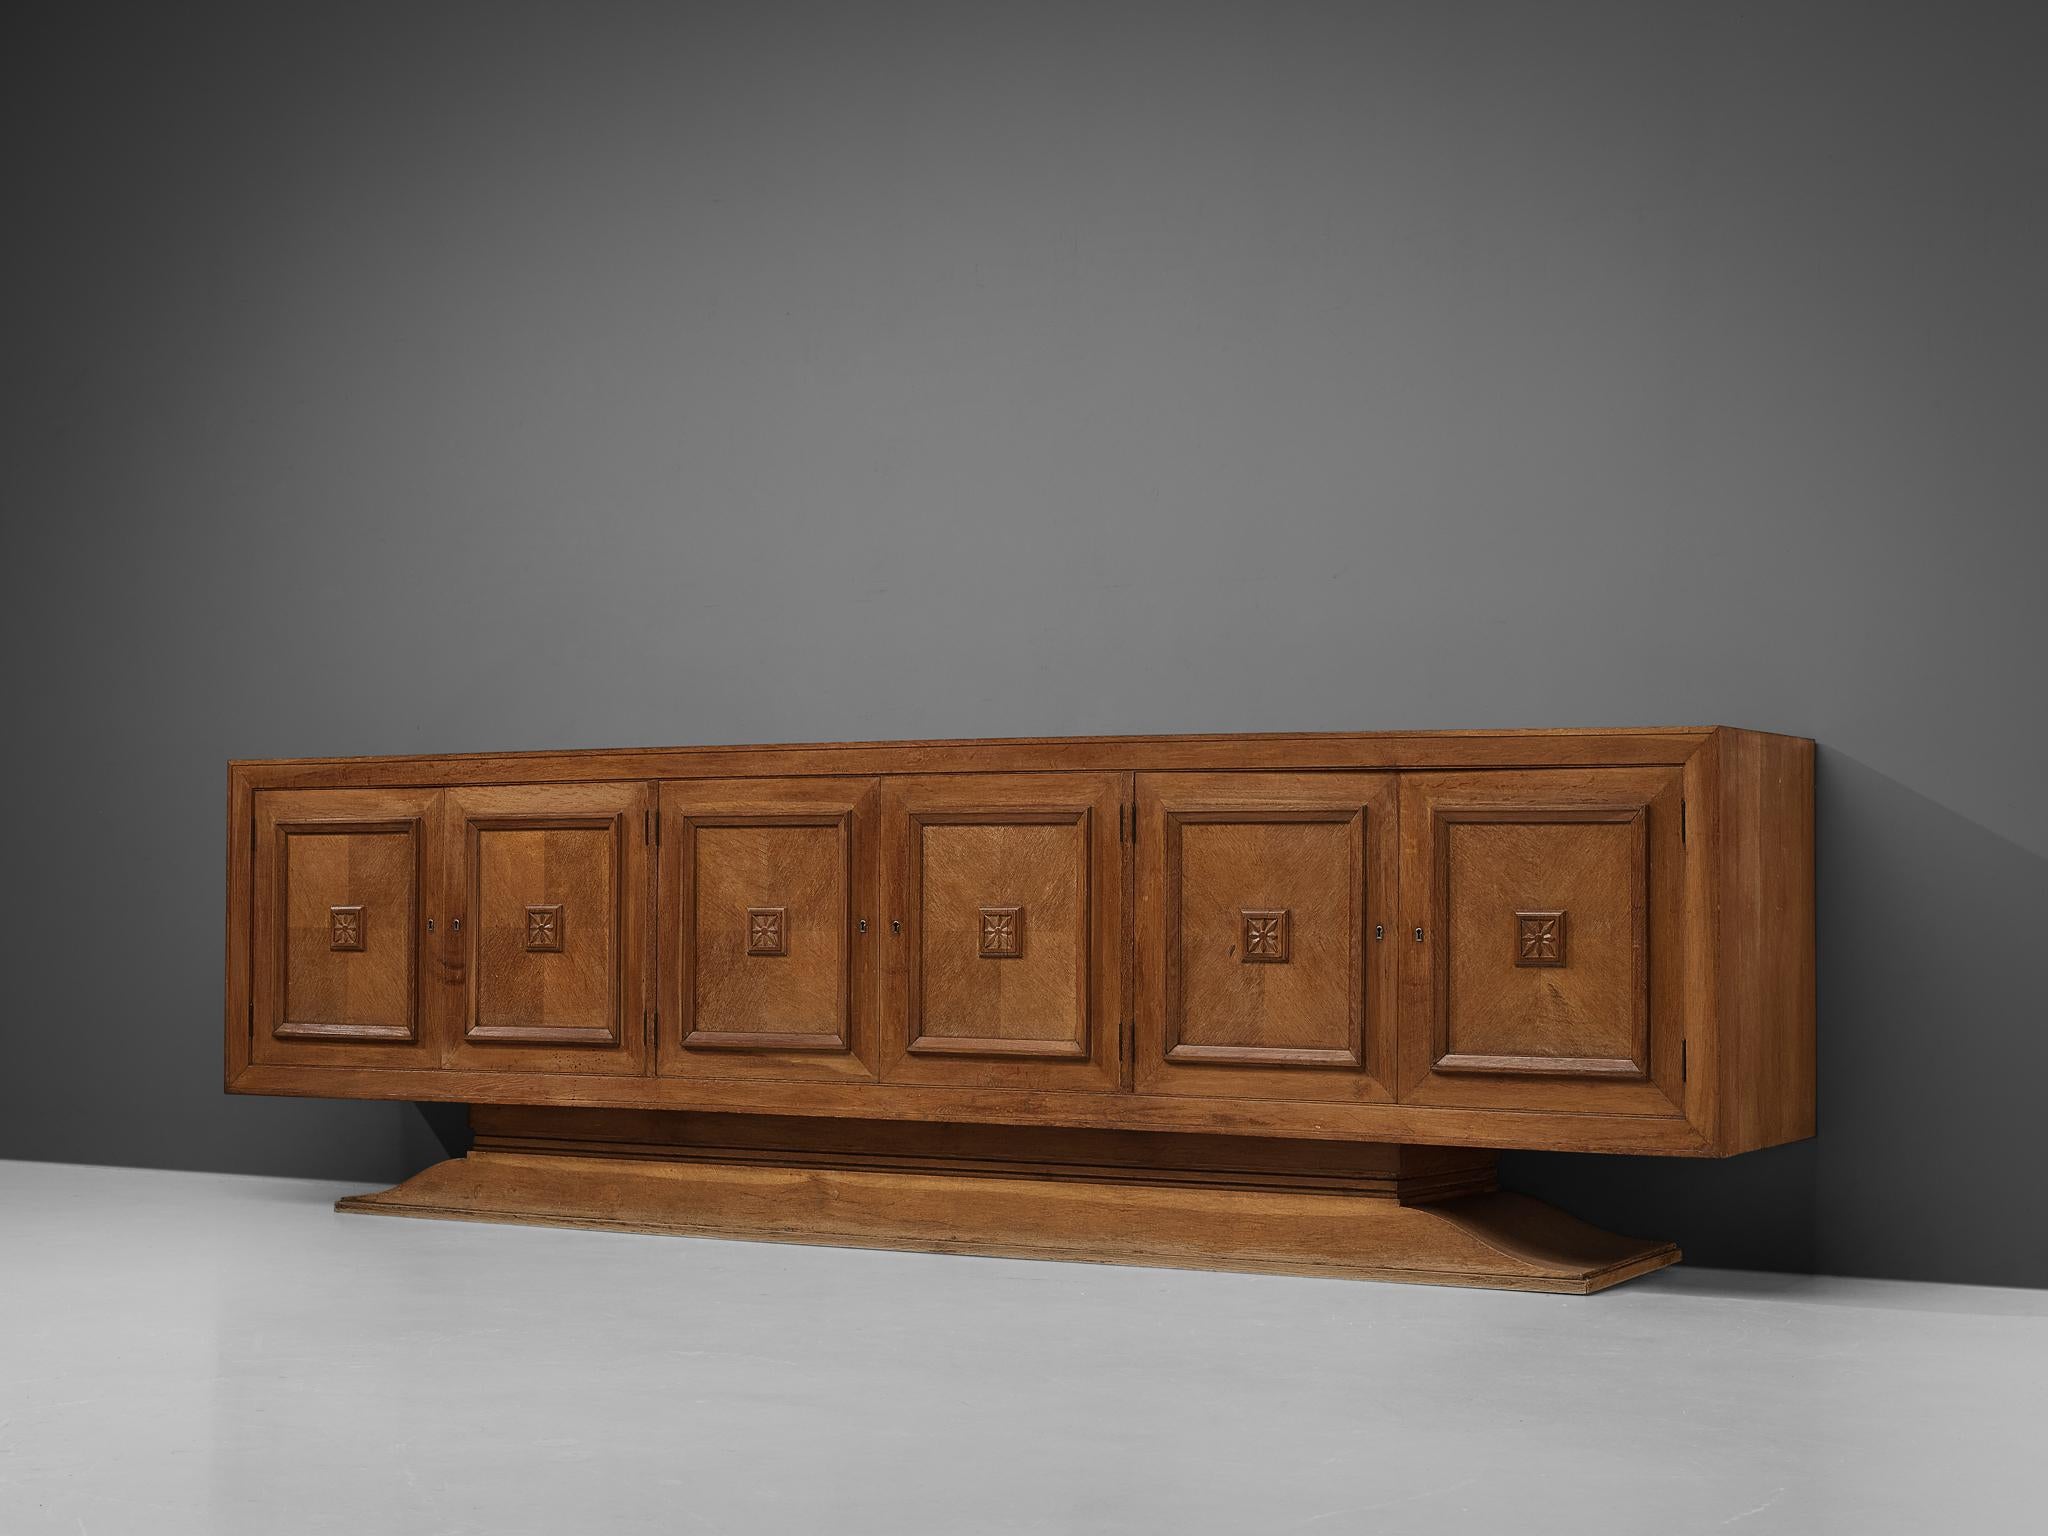 - Large Art Deco sideboard in solid oak: $14700
- Illum Wikkelso Lounge chair: $4950
- Reupholstery: $1550

Please select $5400 dealer shipping at check-out 